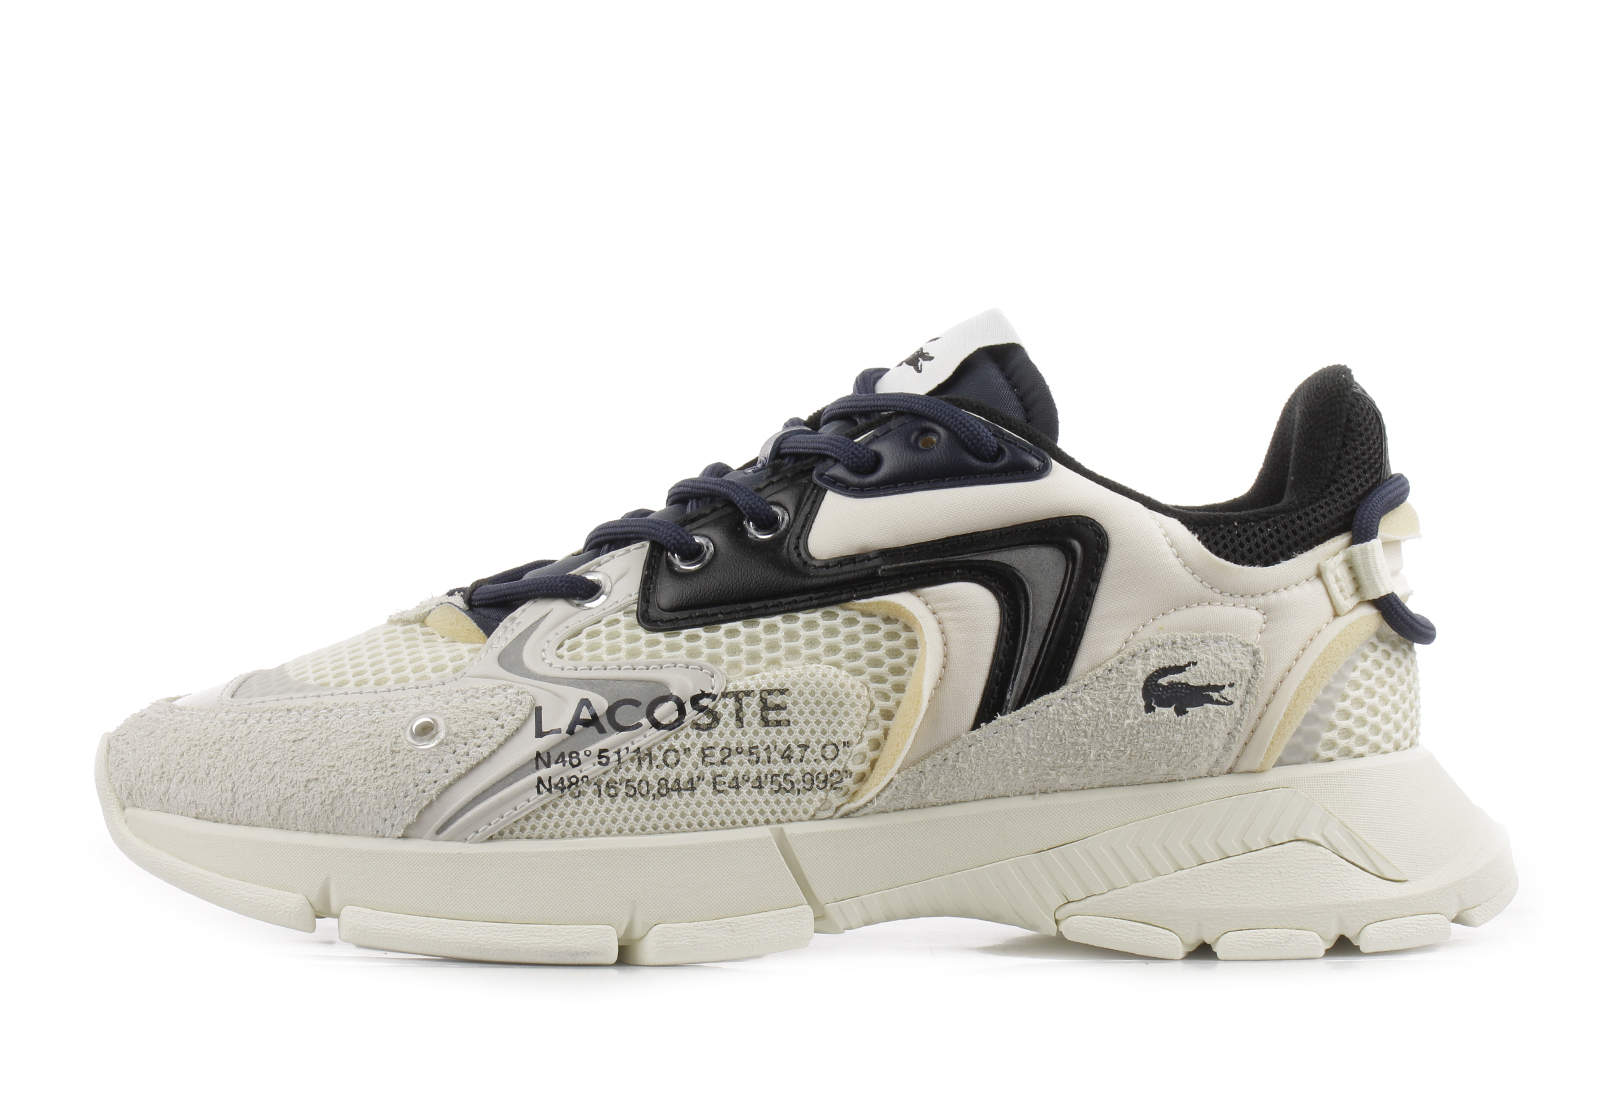 Lacoste Sneakers - L003 - 745SMA0001-2G9 - Online shop for sneakers ...